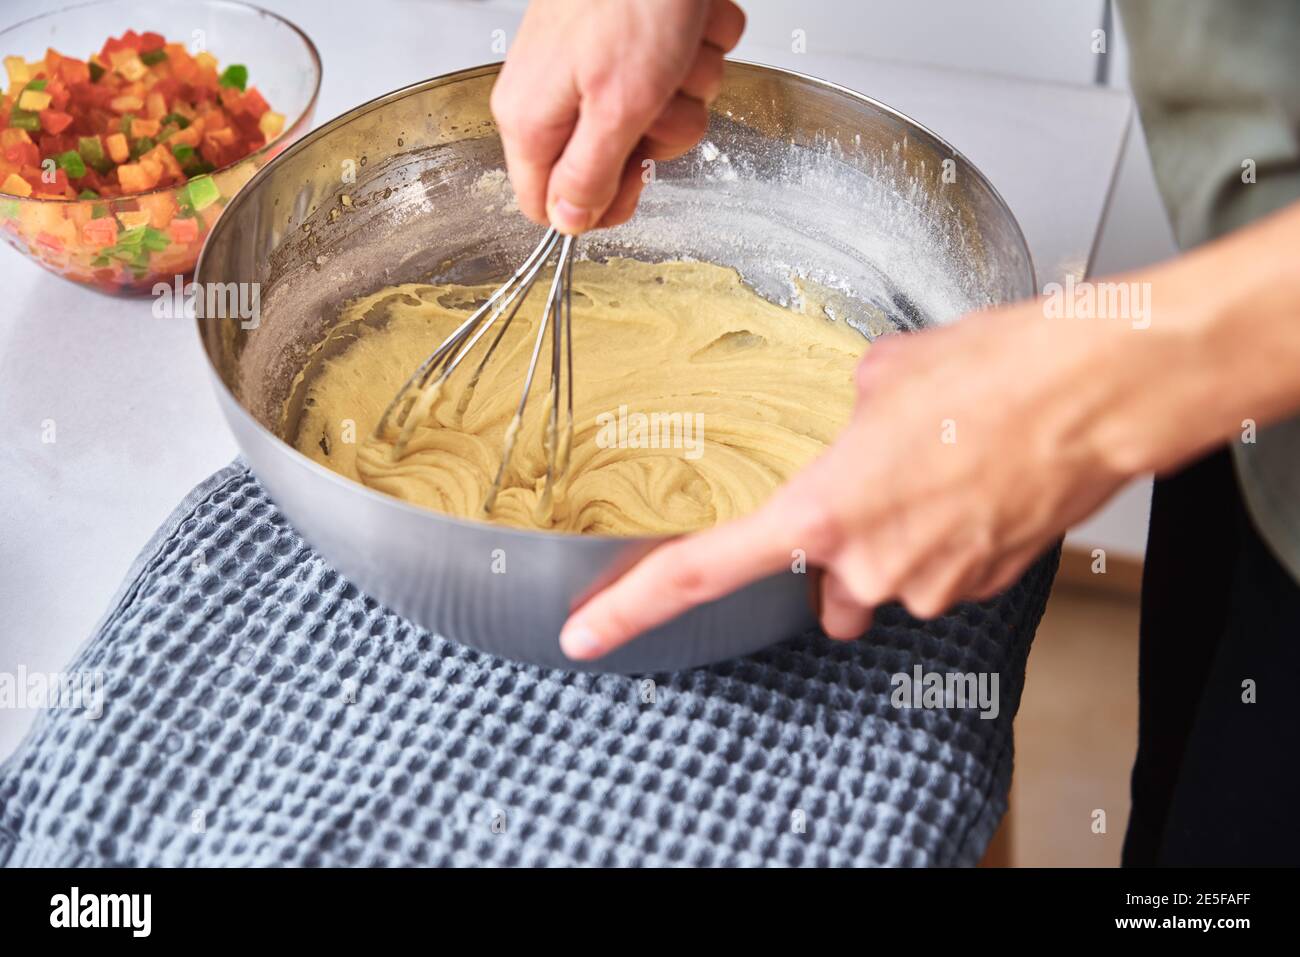 Woman in the kitchen cooking a cake. Hands beat the dough with mixer Stock  Photo - Alamy